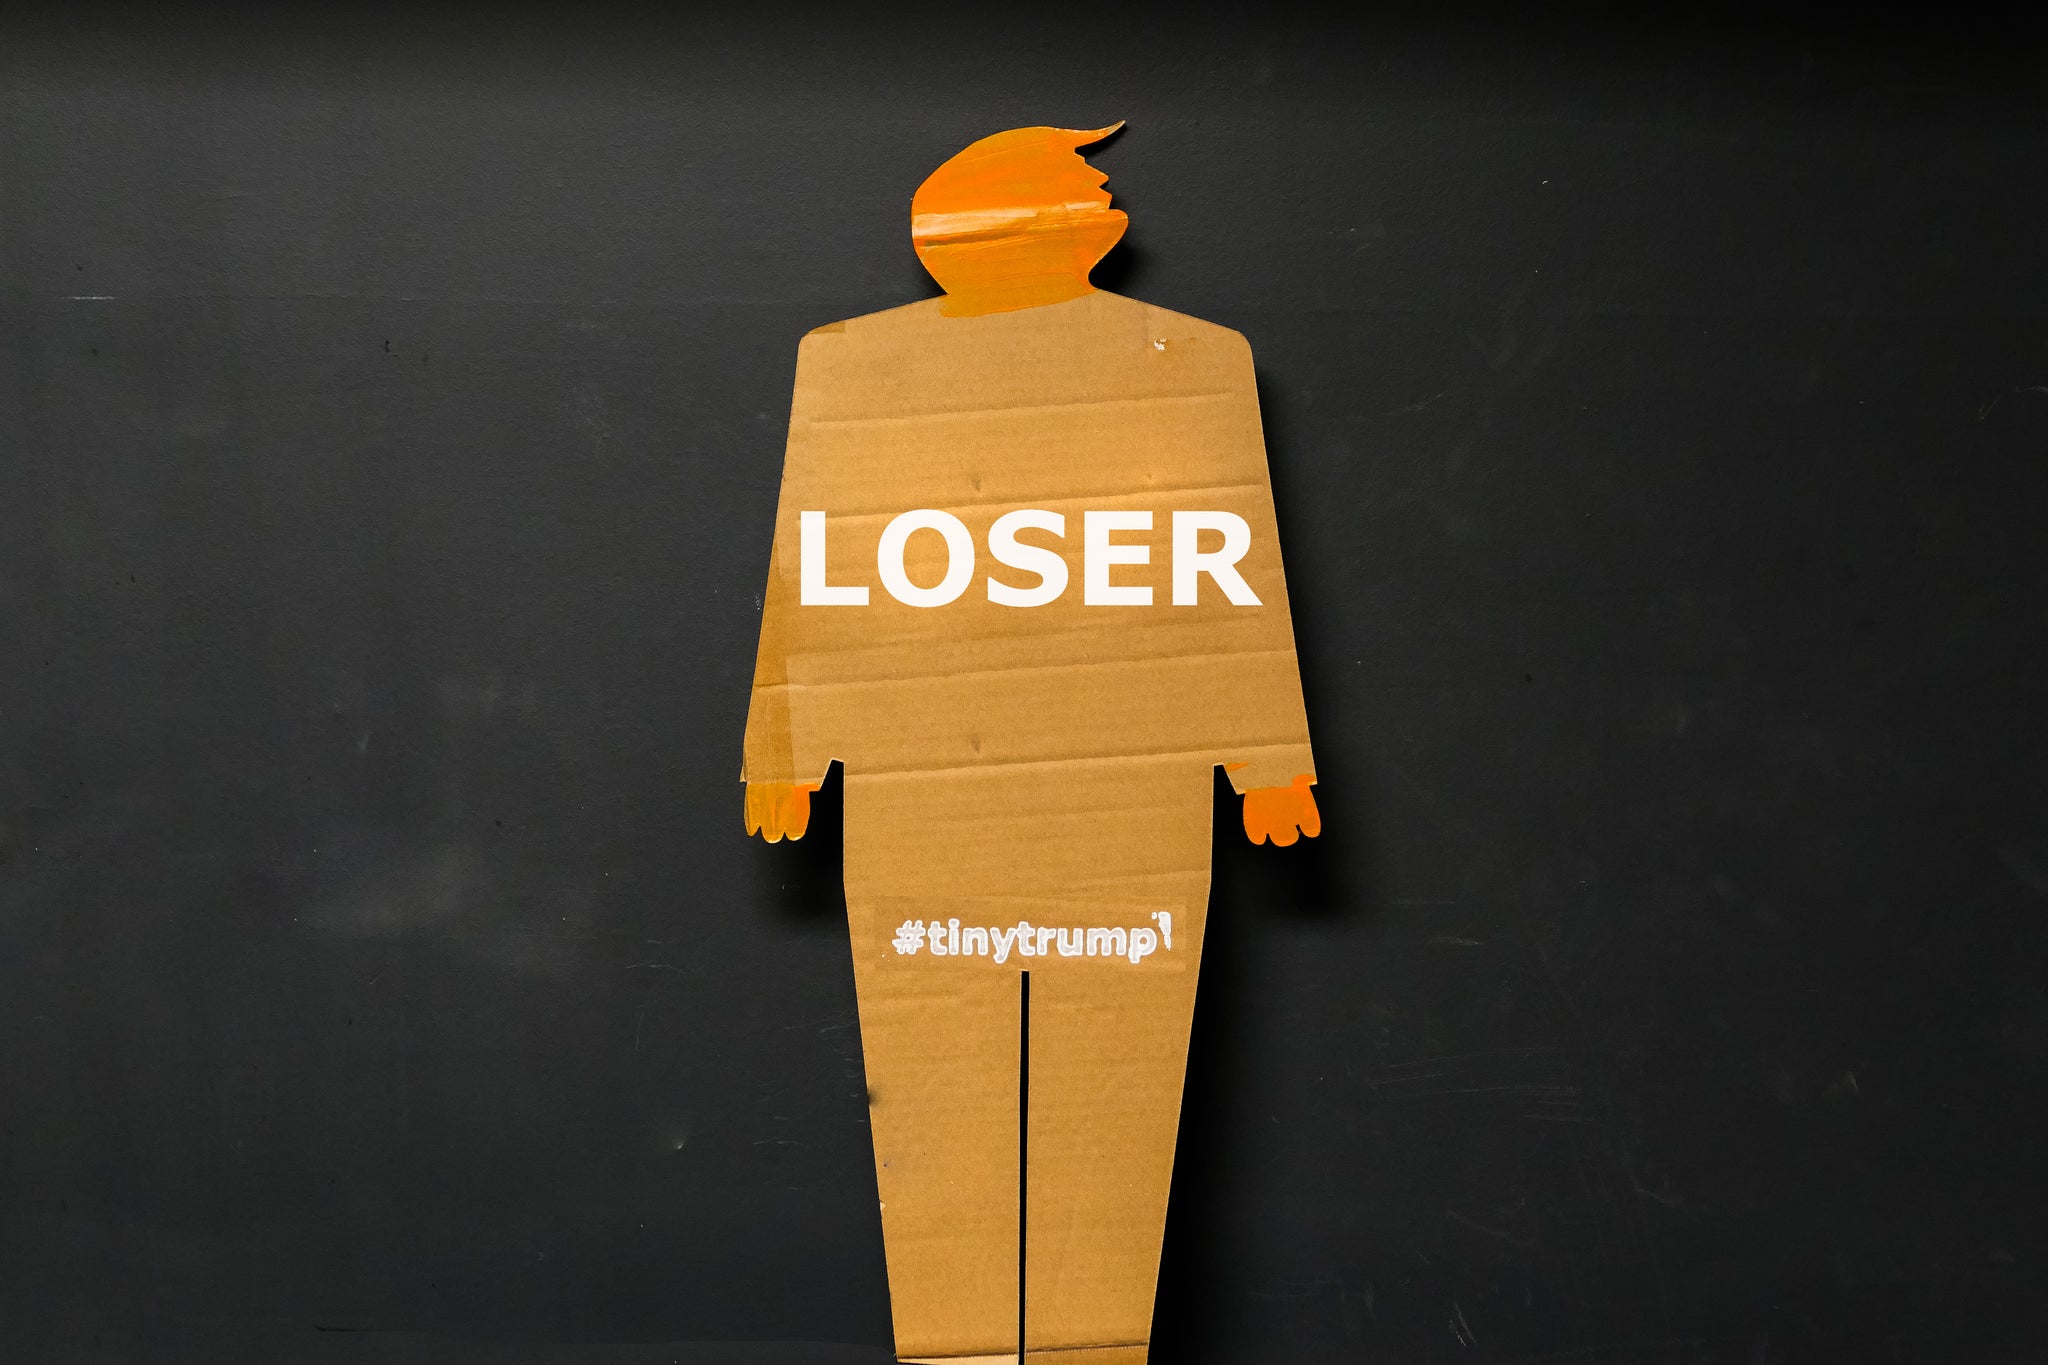 A two foot tall, cardboard tiny trump with the slogan "Loser"